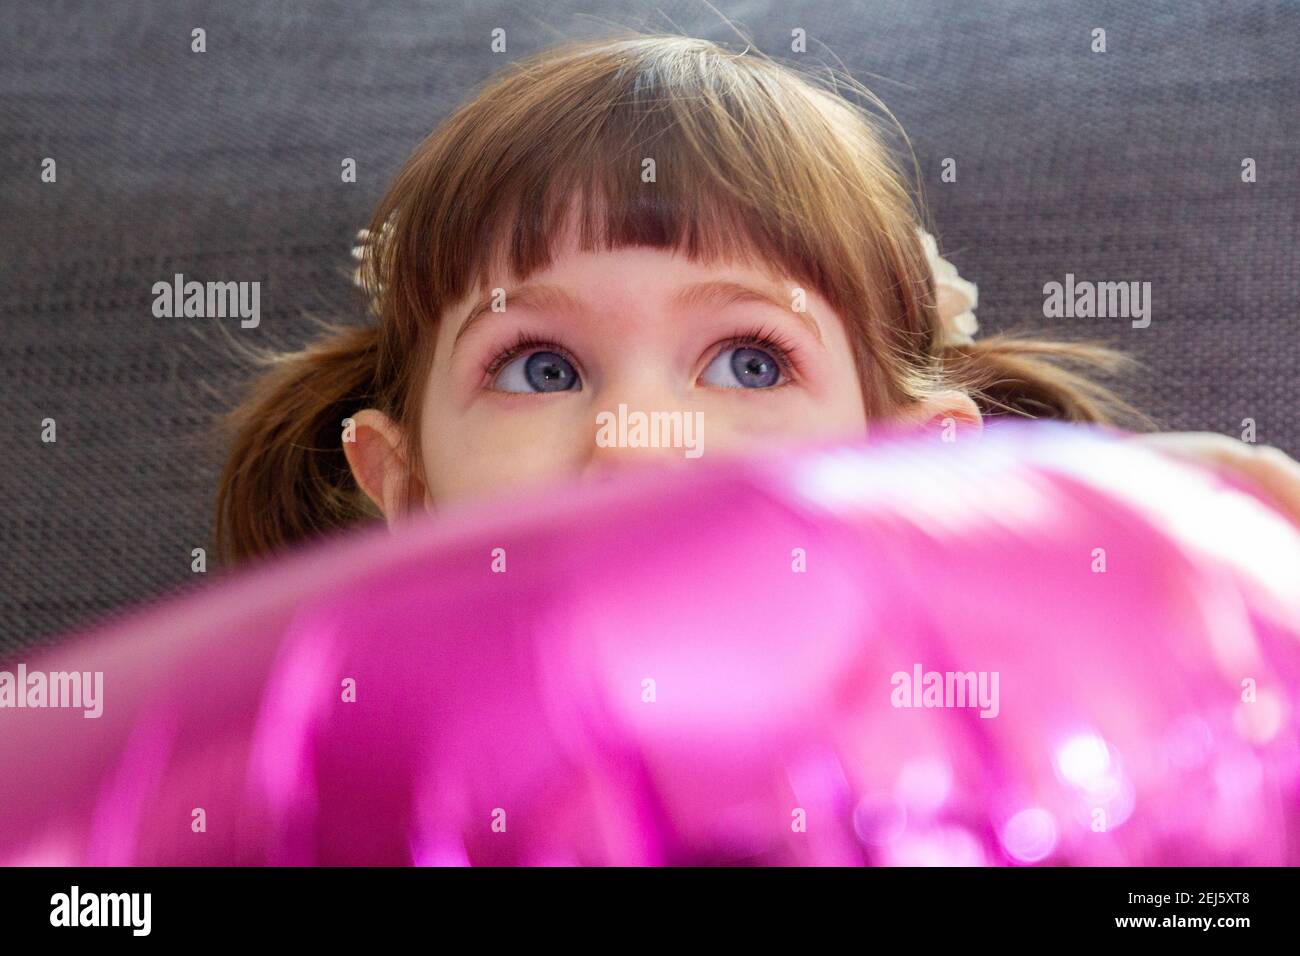 A cute, brown-haired, blue-eyed baby girl sitting on a sofe and hading her face behind a big pink balloon. Stock Photo